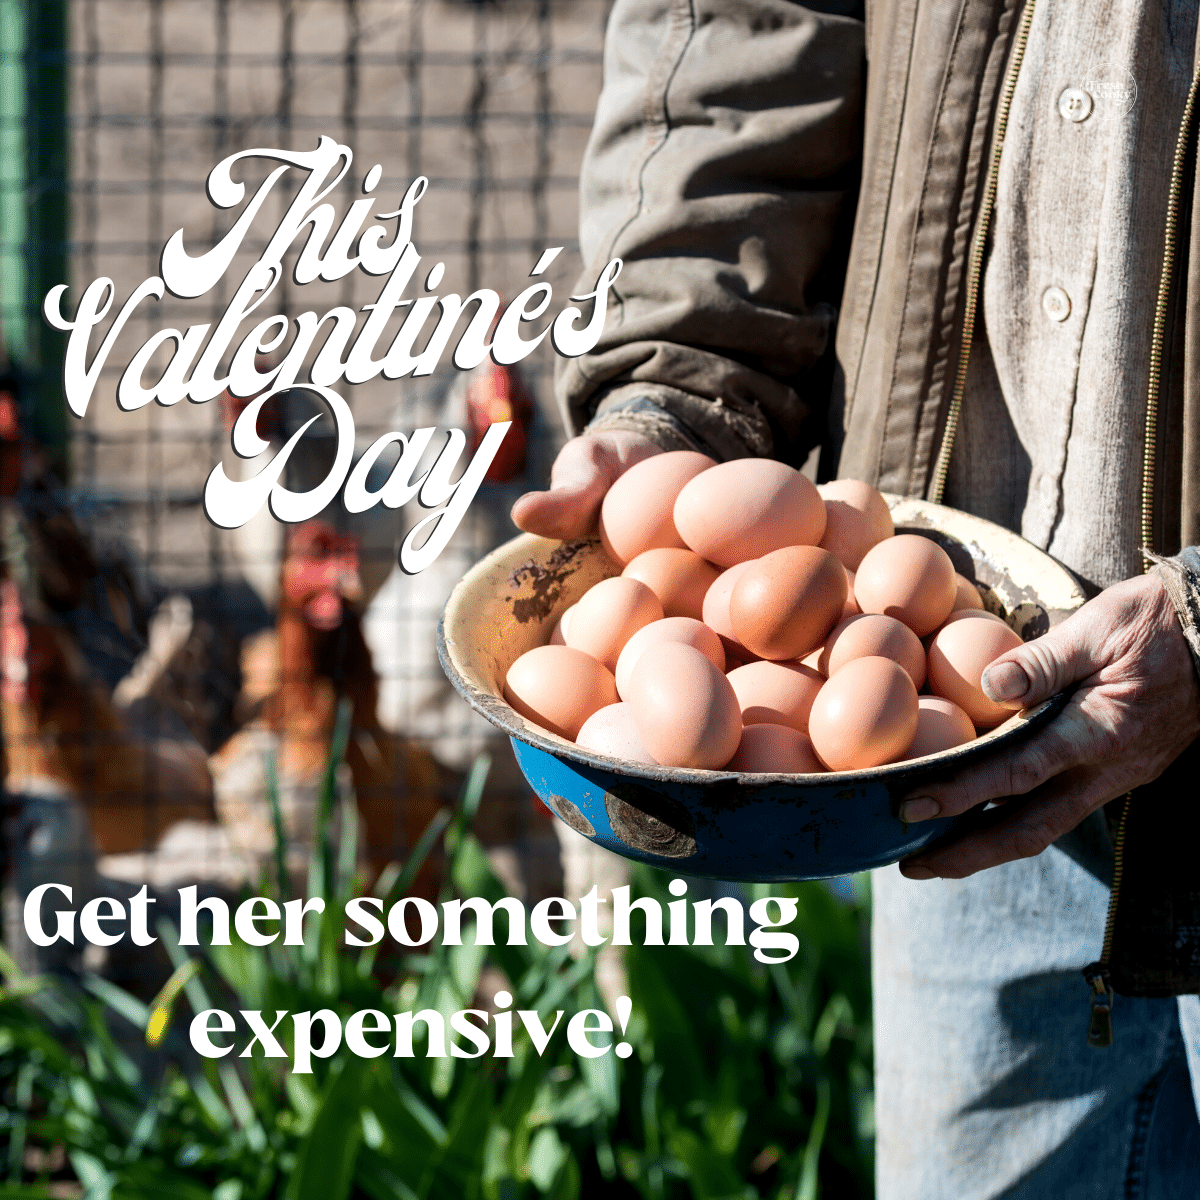 Funny meme with man holding bowl of eggs, This Valentine's day get her something expensive.